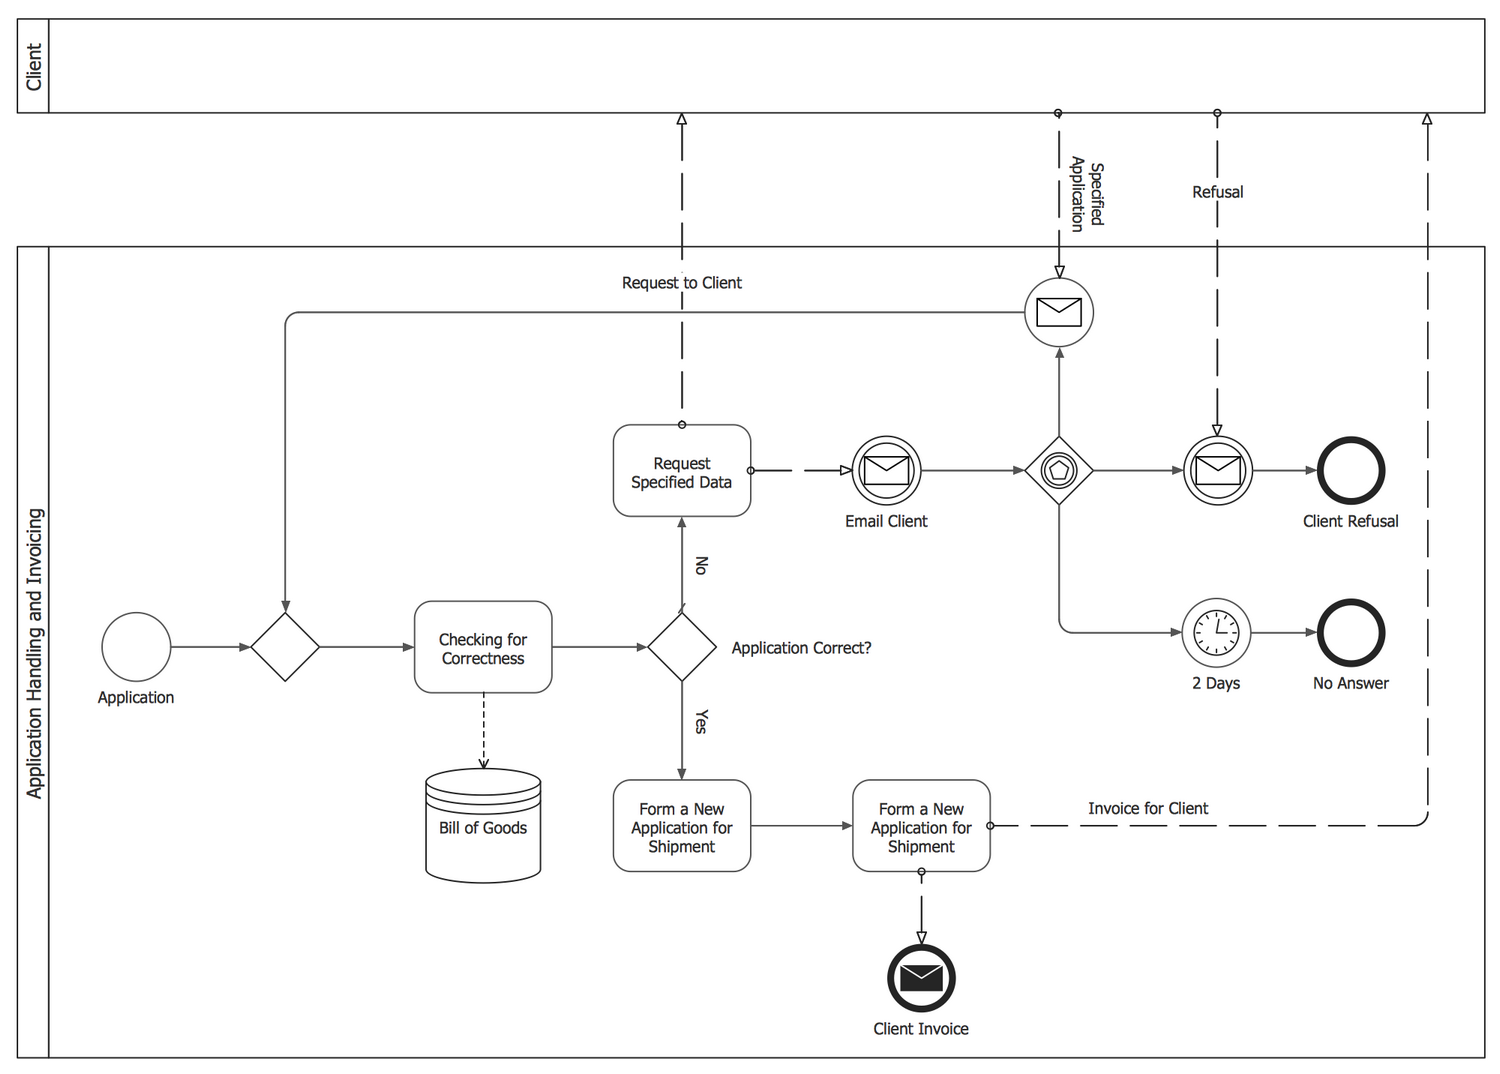 Application Handling and Invoicing — Collaboration BPMN 2.0 Diagram